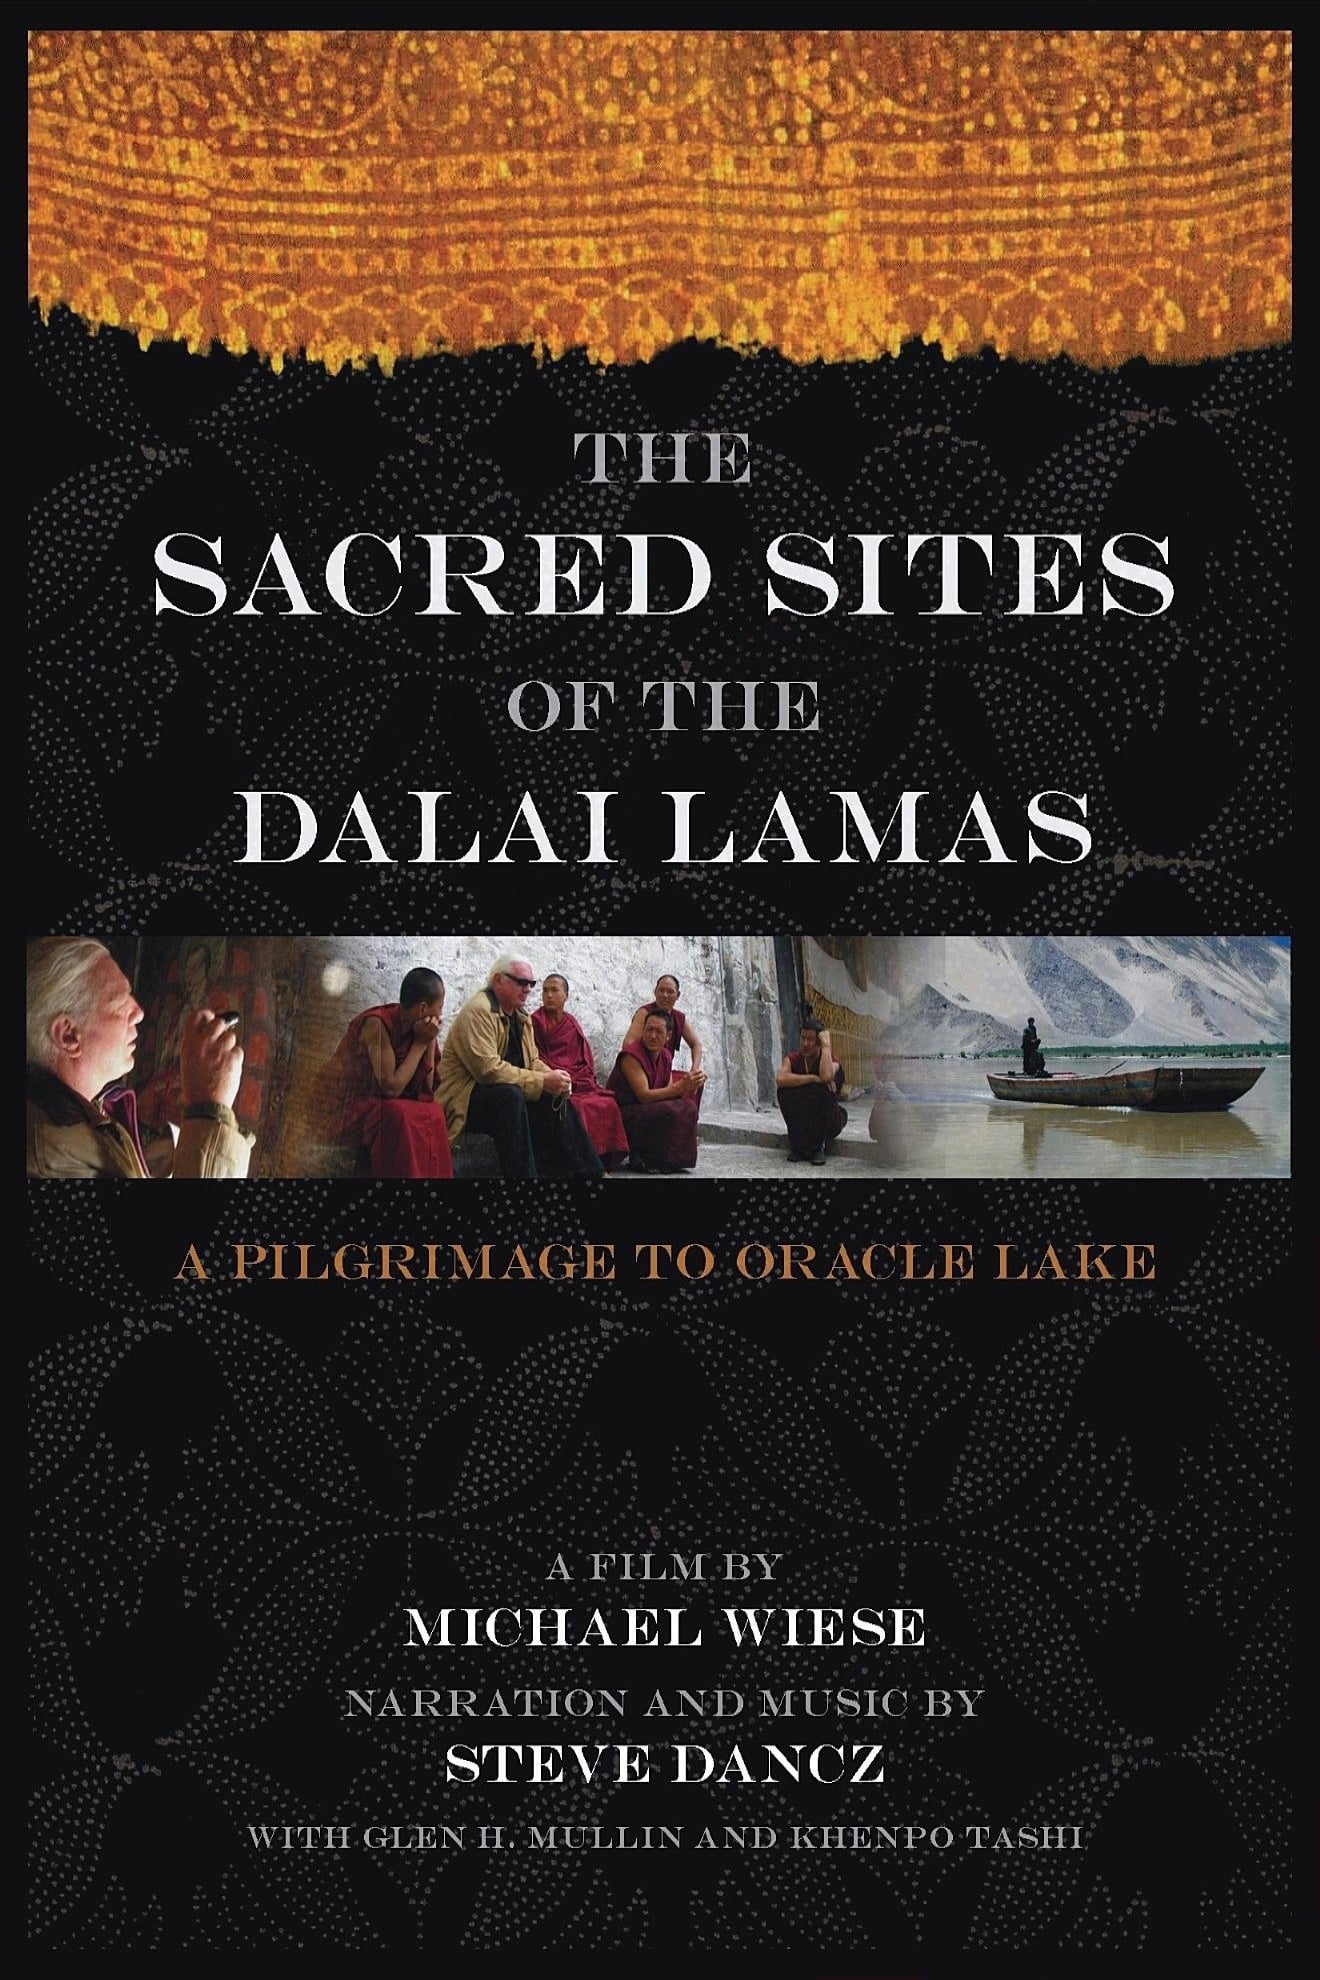 The Sacred Sites of the Dalai Lamas: A Pilgrimage to the Oracle Lake